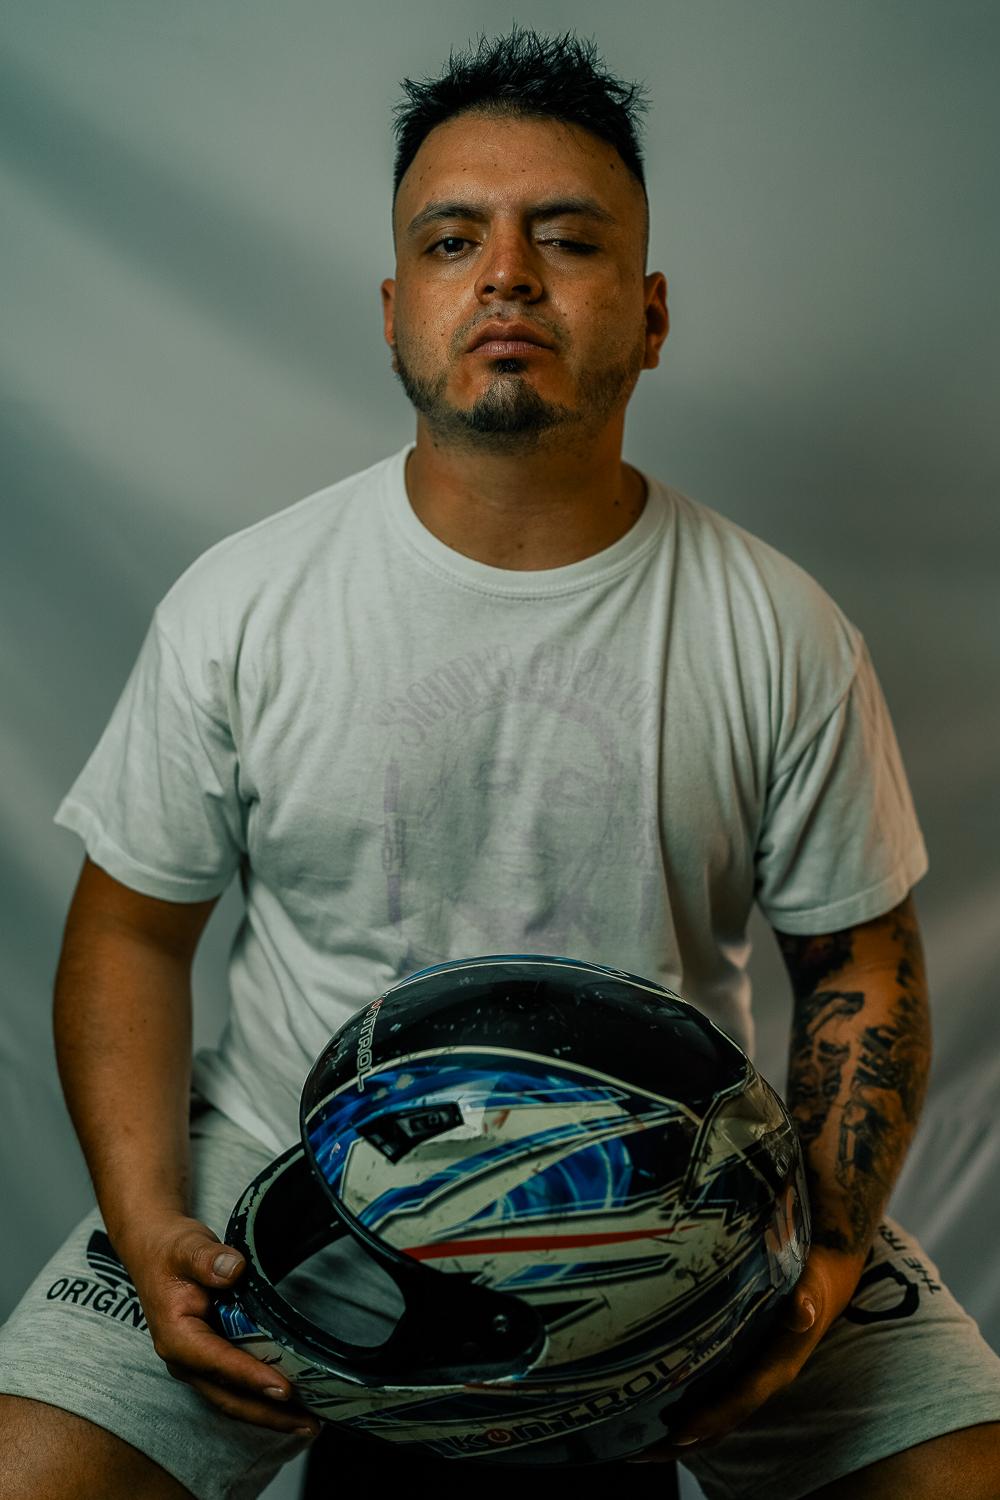 The Washington Post: Resistencia  - Michael is a frontline protester who poses with the helmet he used in the strike, and states,...